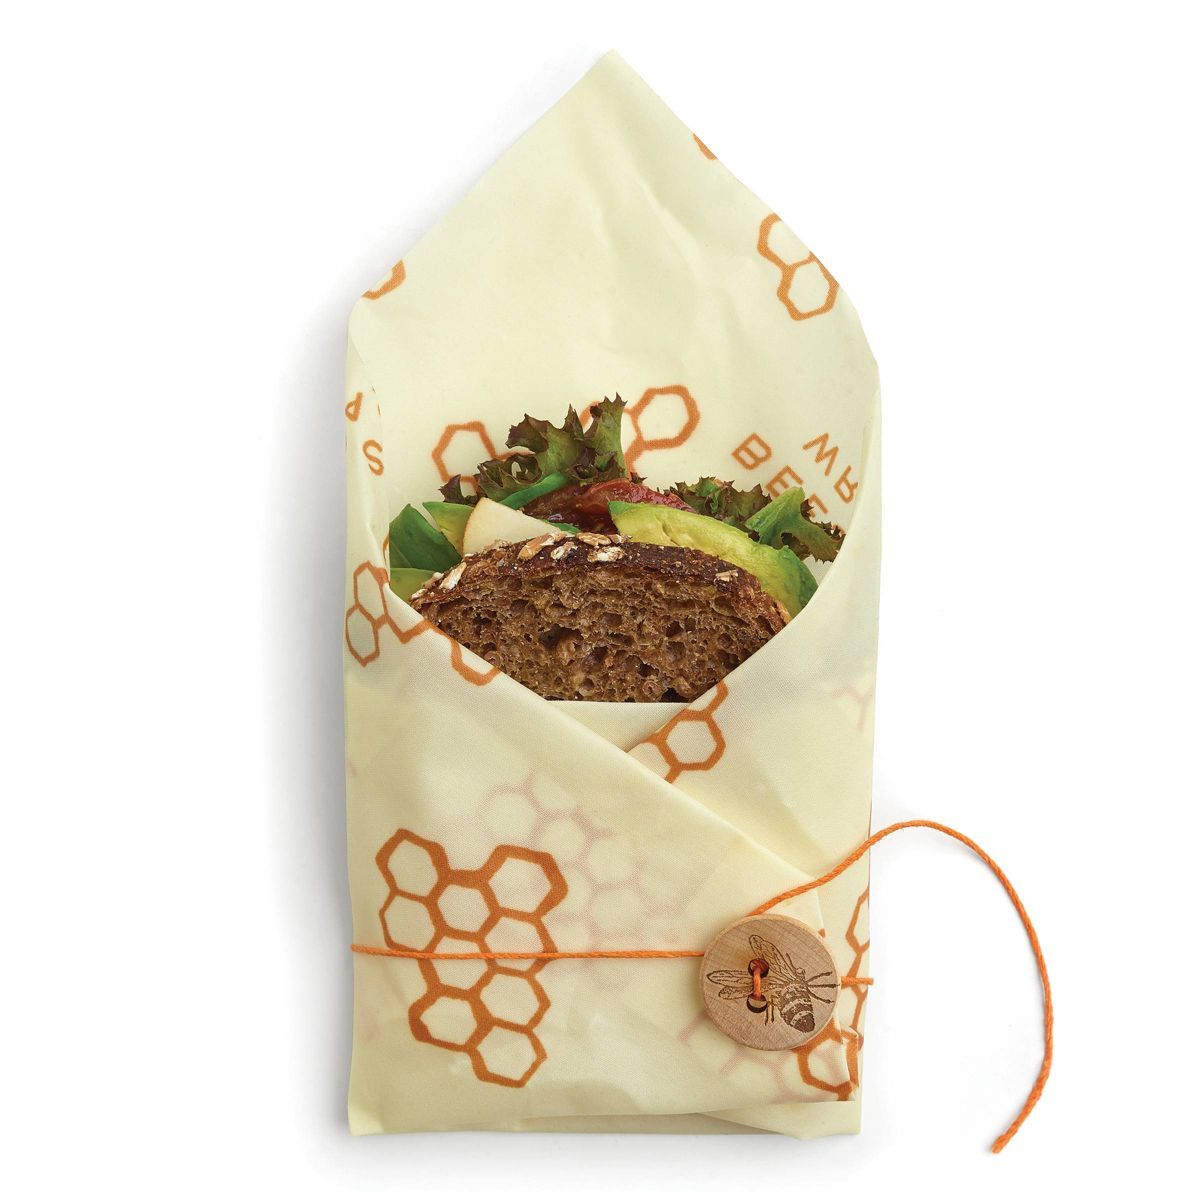 Bee's Wrap Sandwich Wrap Reusable Beeswax Food Wrap Sustainable Plastic Free Food Storage | Target